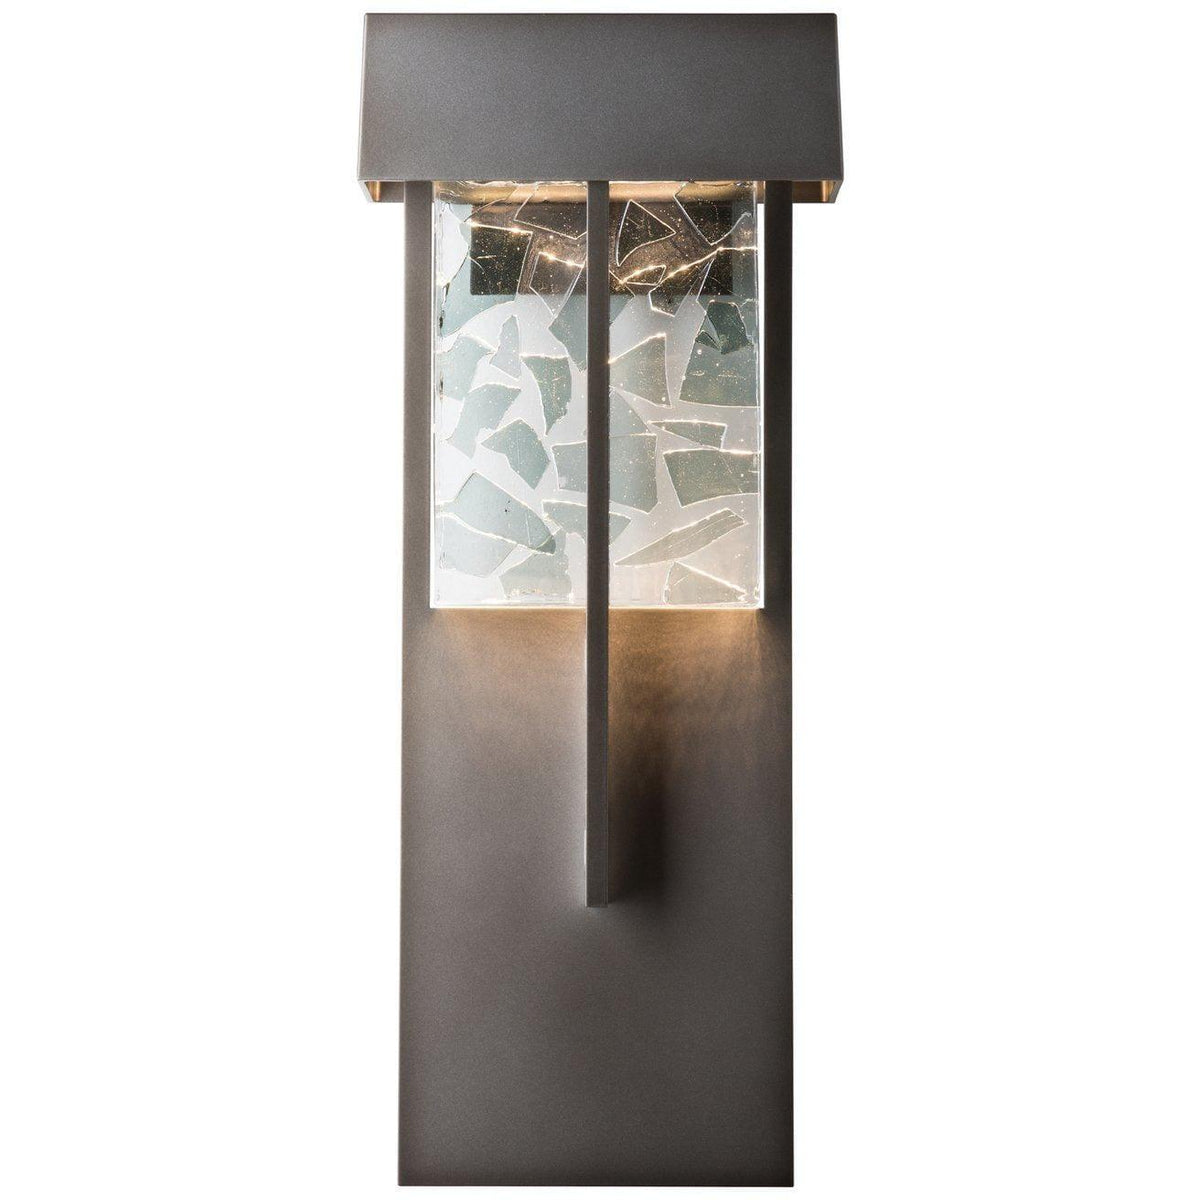 Hubbardton Forge - Shard 20-Inch LED Outdoor Wall Sconce - 302518-LED-77-YP0669 | Montreal Lighting & Hardware